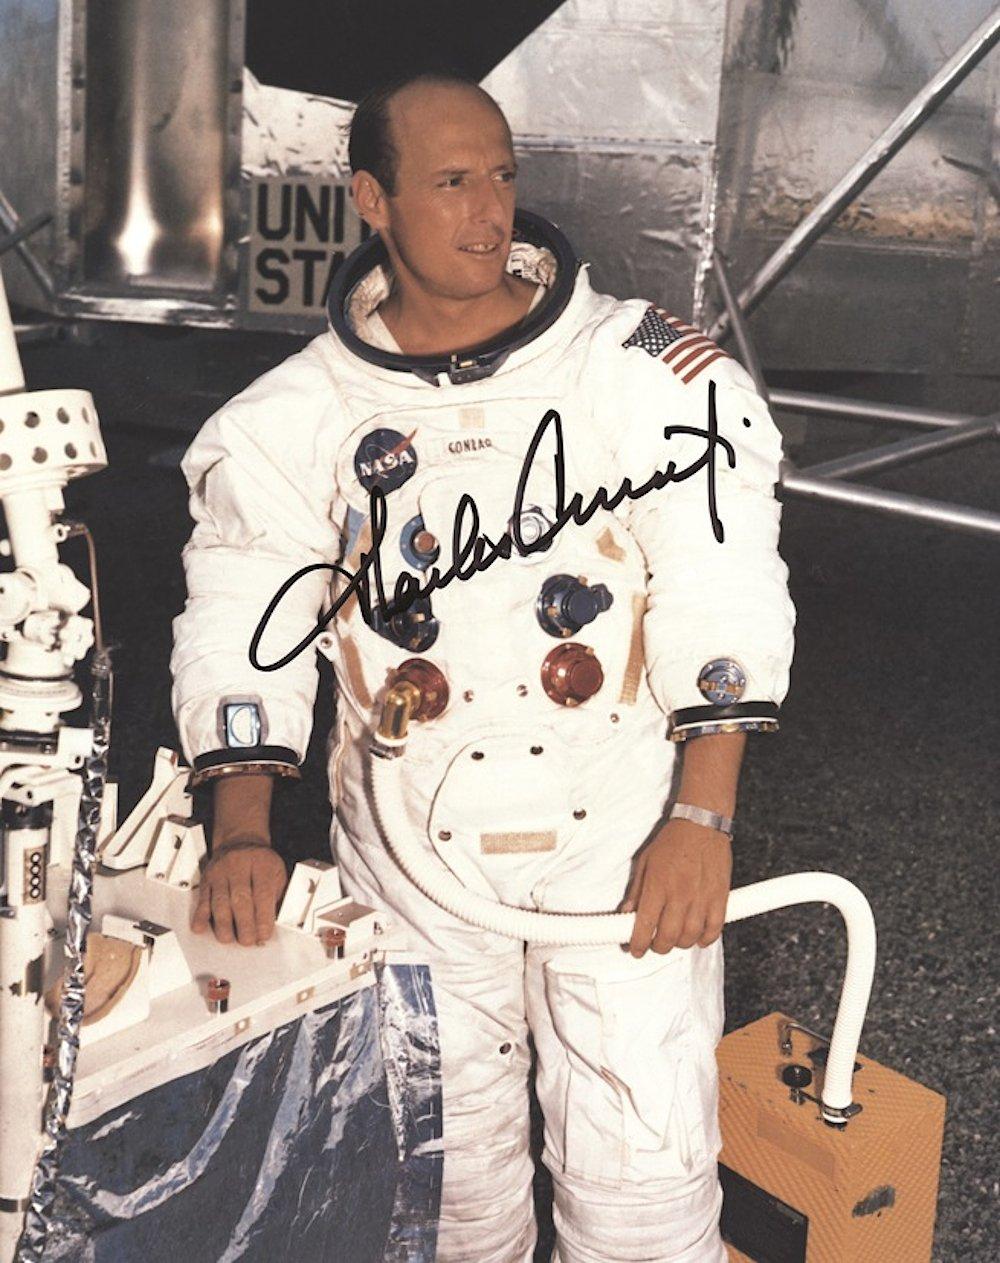 Paper Pete Conrad Signed Photograph with Certificate of Authenticity